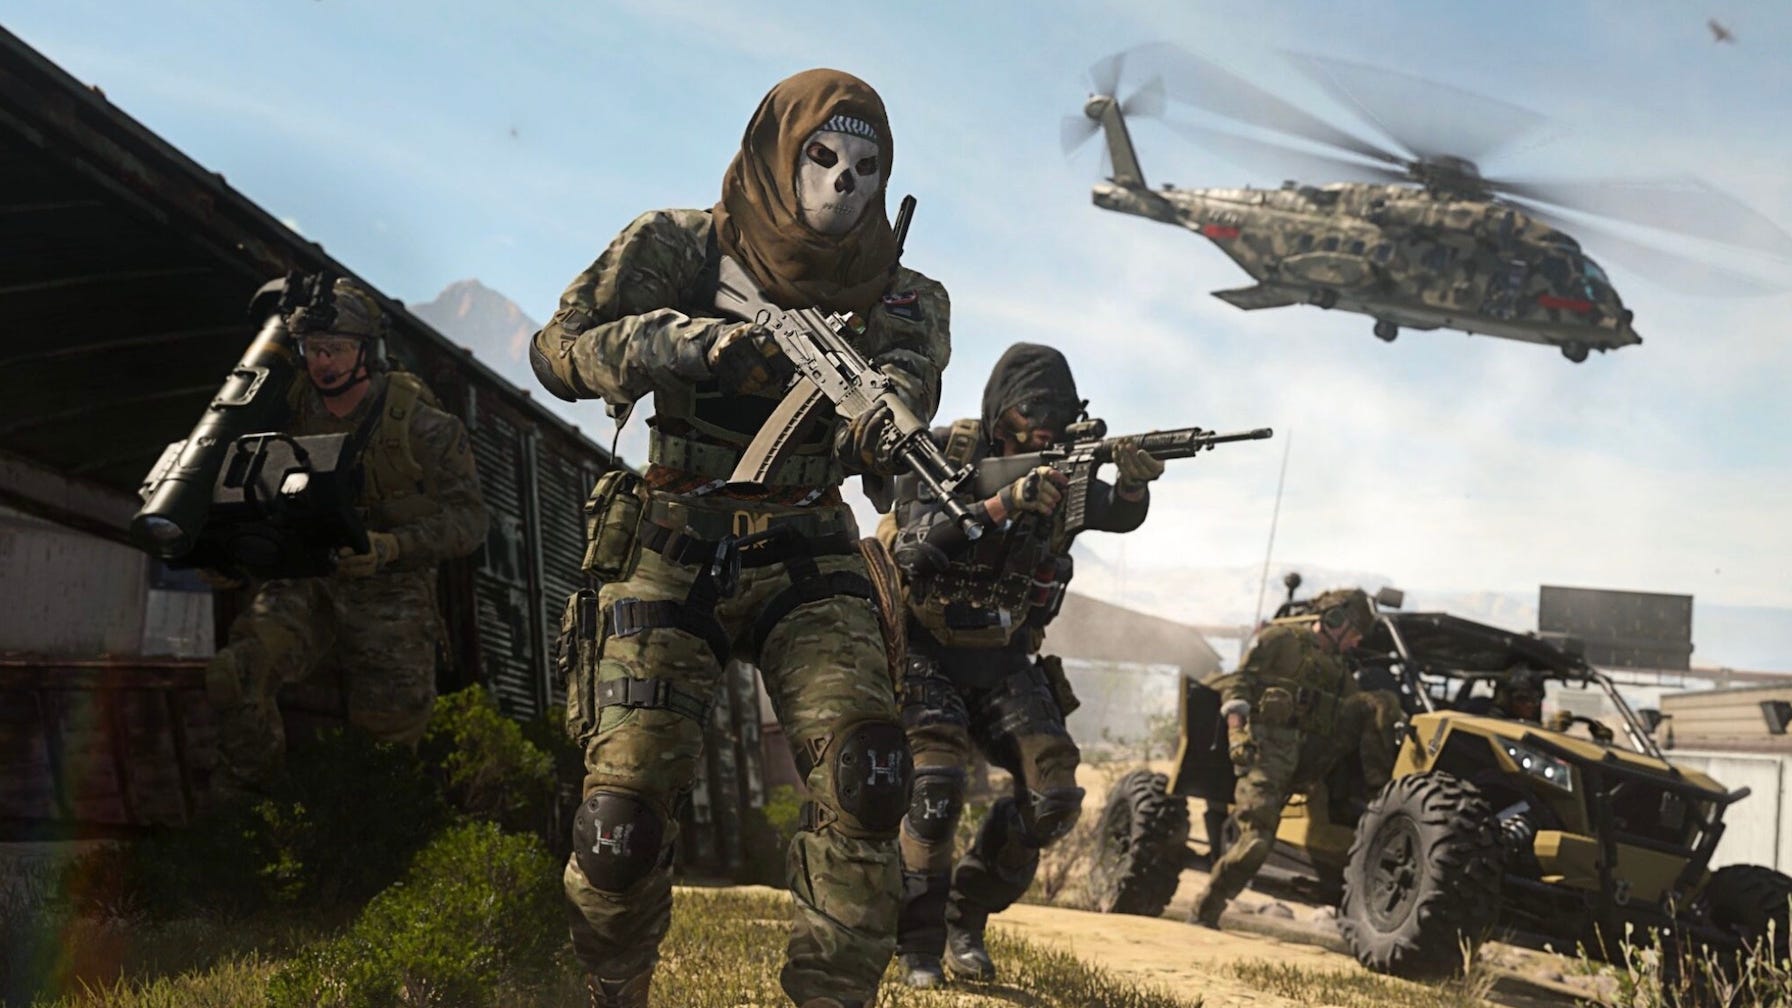 Is Call of Duty 2023 Going To Be The Last Modern Warfare Game? -  EssentiallySports